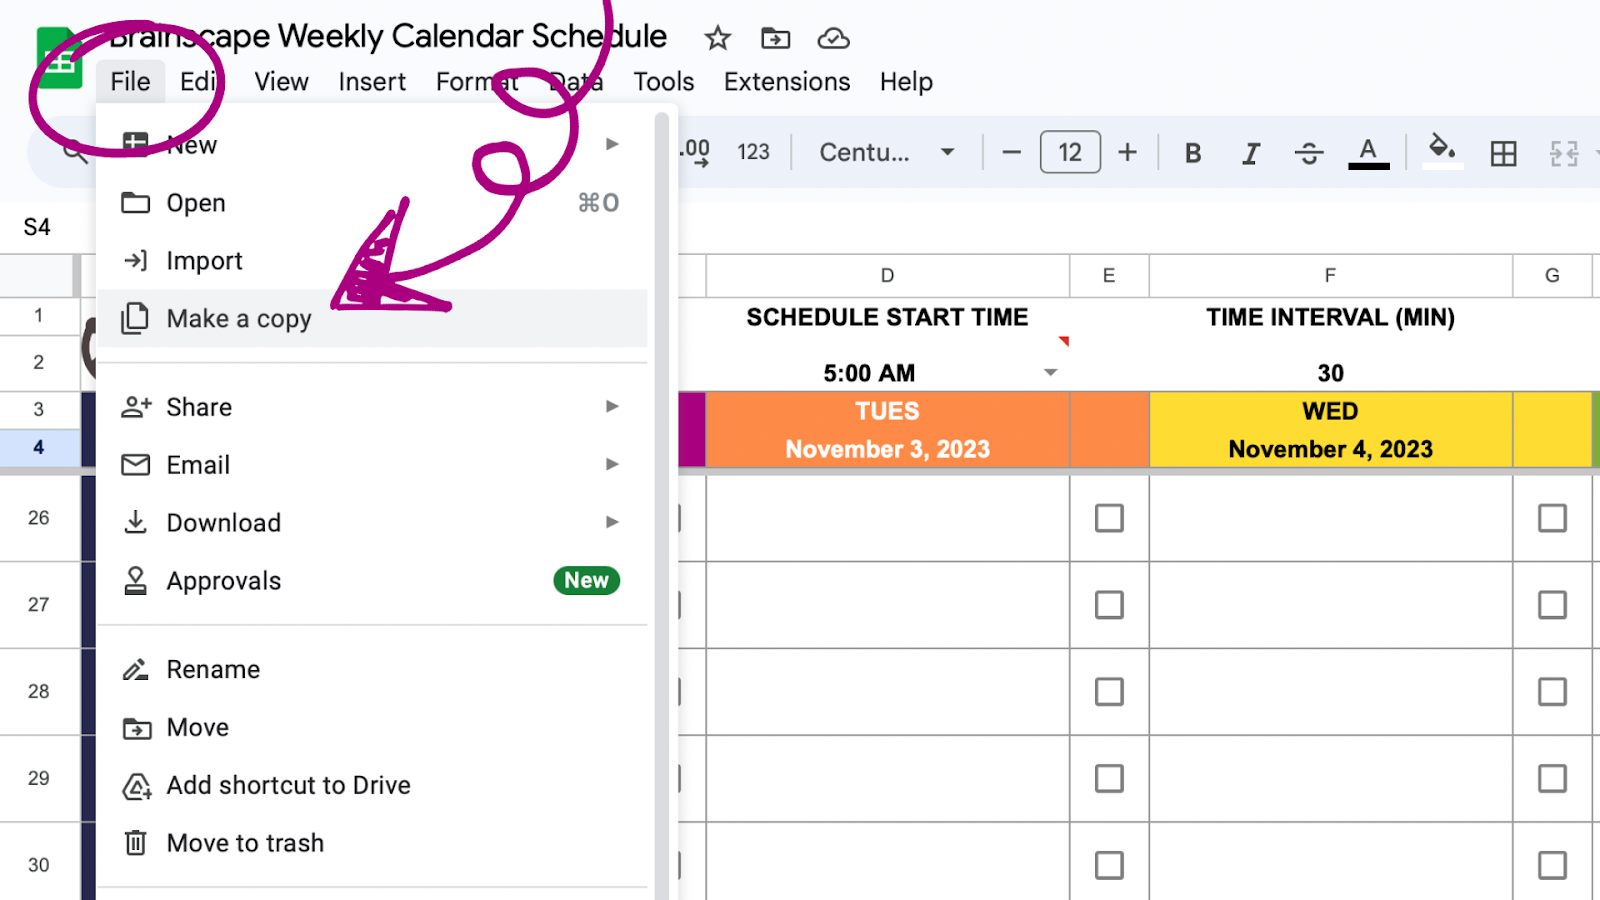 How to make an editable copy of a Google Sheets template